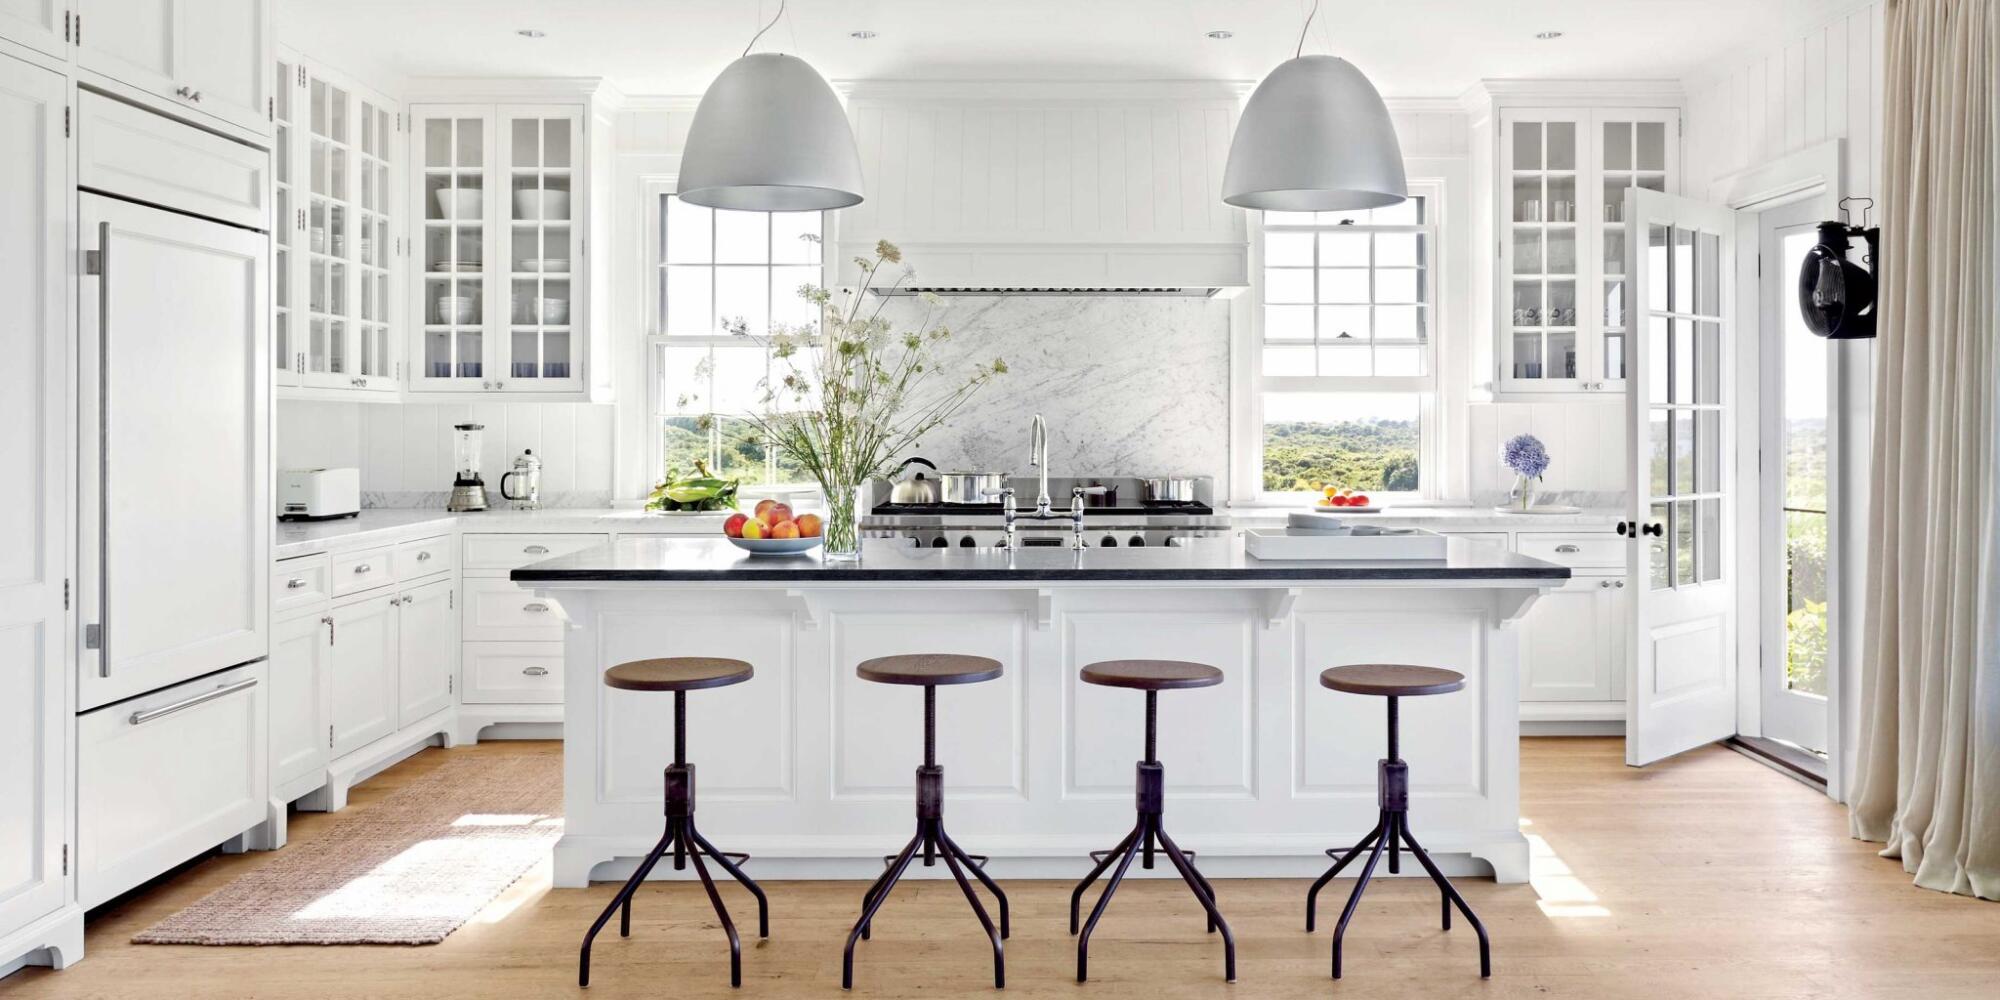 A renovated kitchen with a central island and stools.